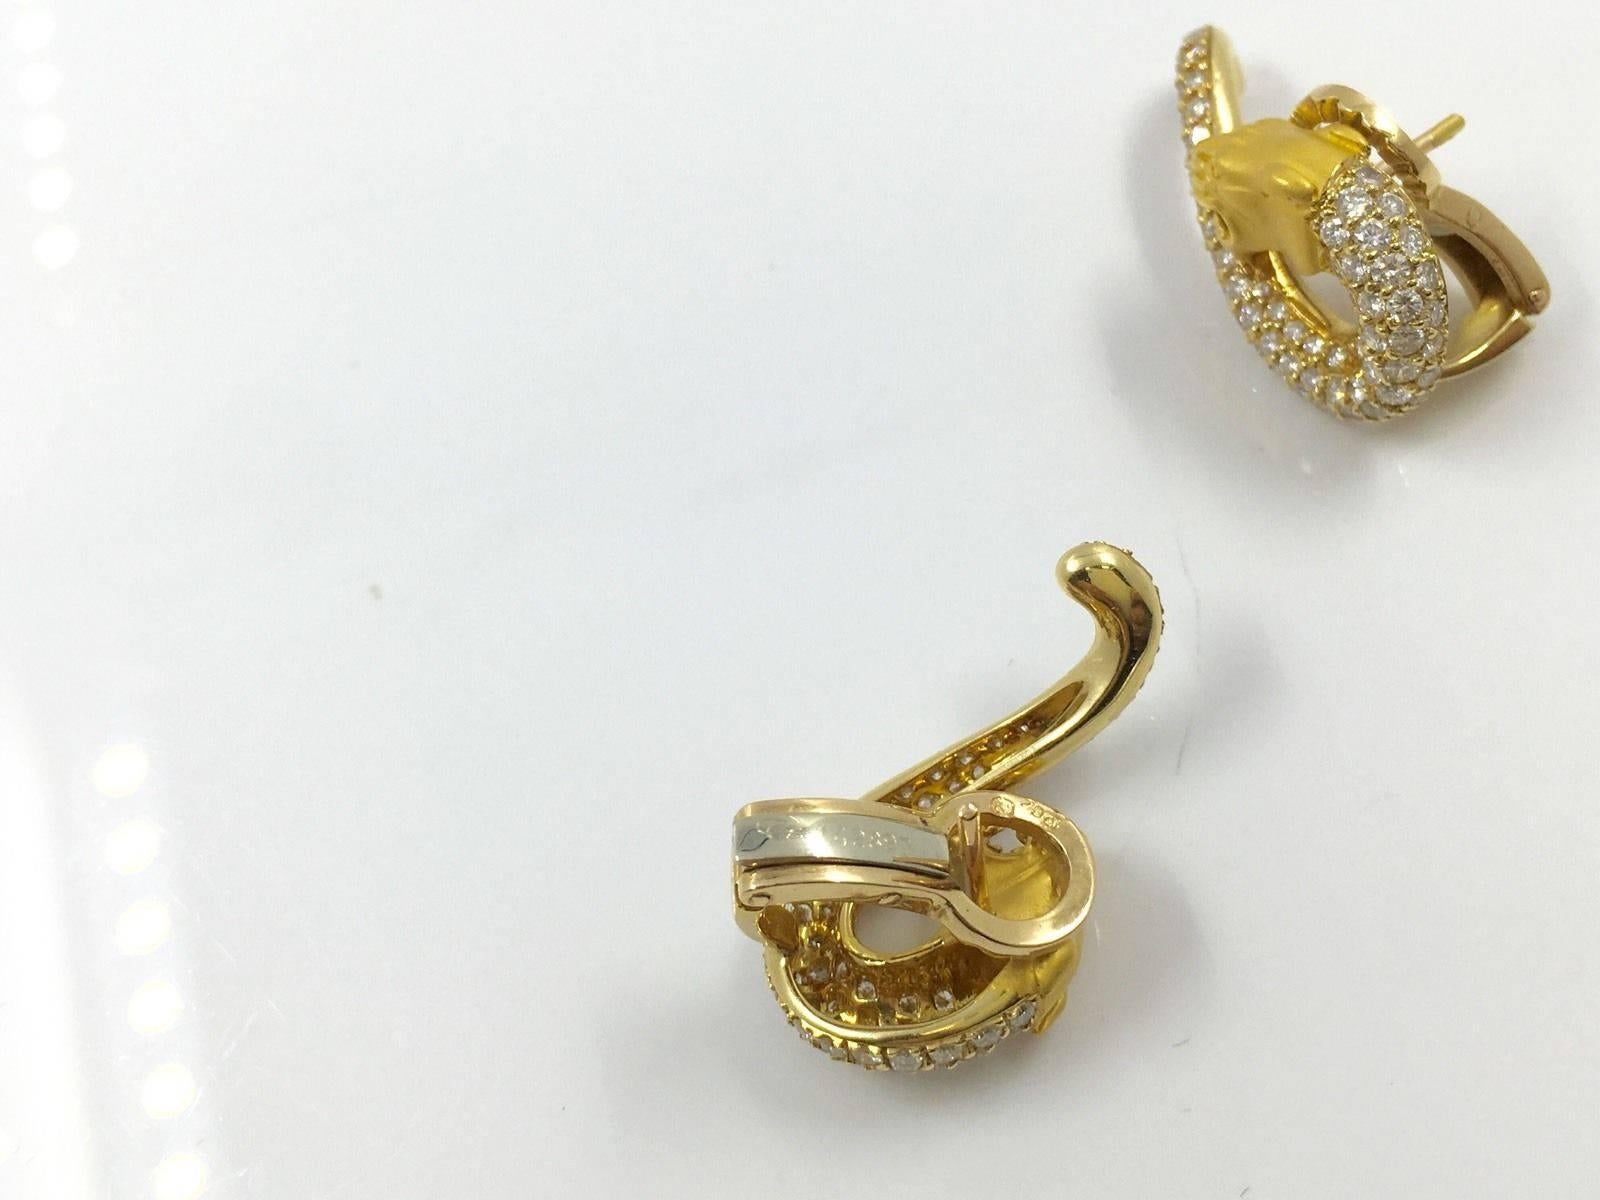 Carrera y Carrera  Panther Yellow Gold & Diamond Earrings

Beautiful panther earrings by Carrera y Carrera are handmade in Spain
Designer jewelry is crafted of lustrous 18-karat yellow gold
Earrings feature brilliant round diamonds and  for the